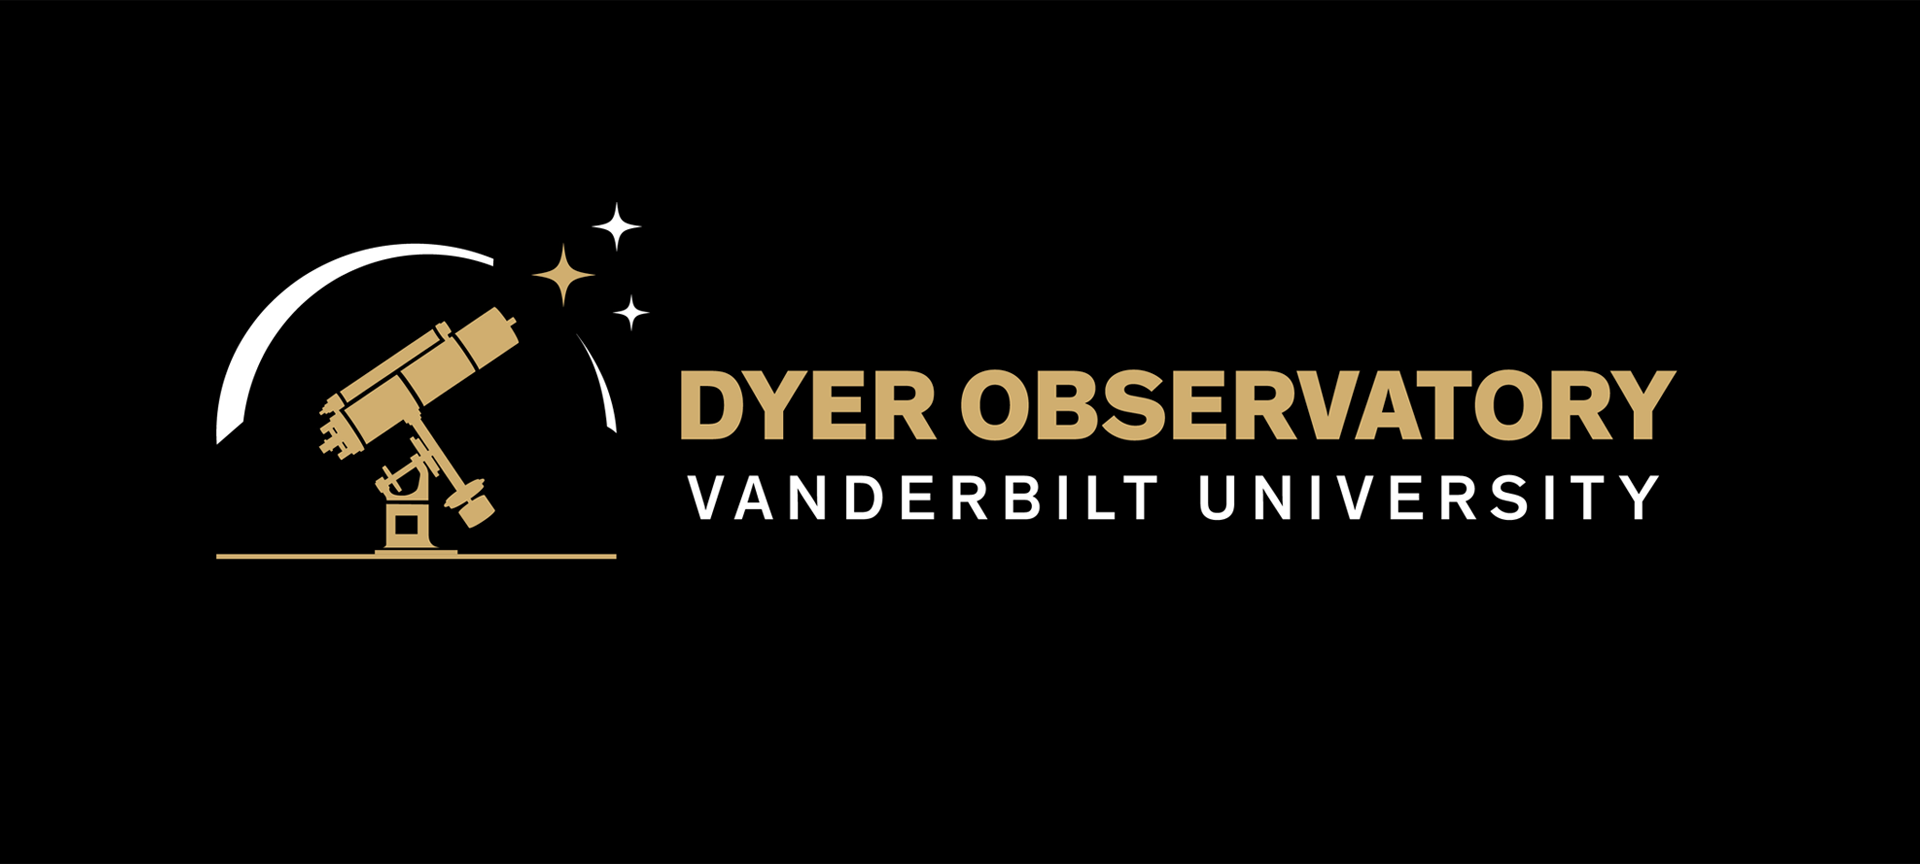 Vanderbilt Dyer Observatory launches 2024 season with a new look